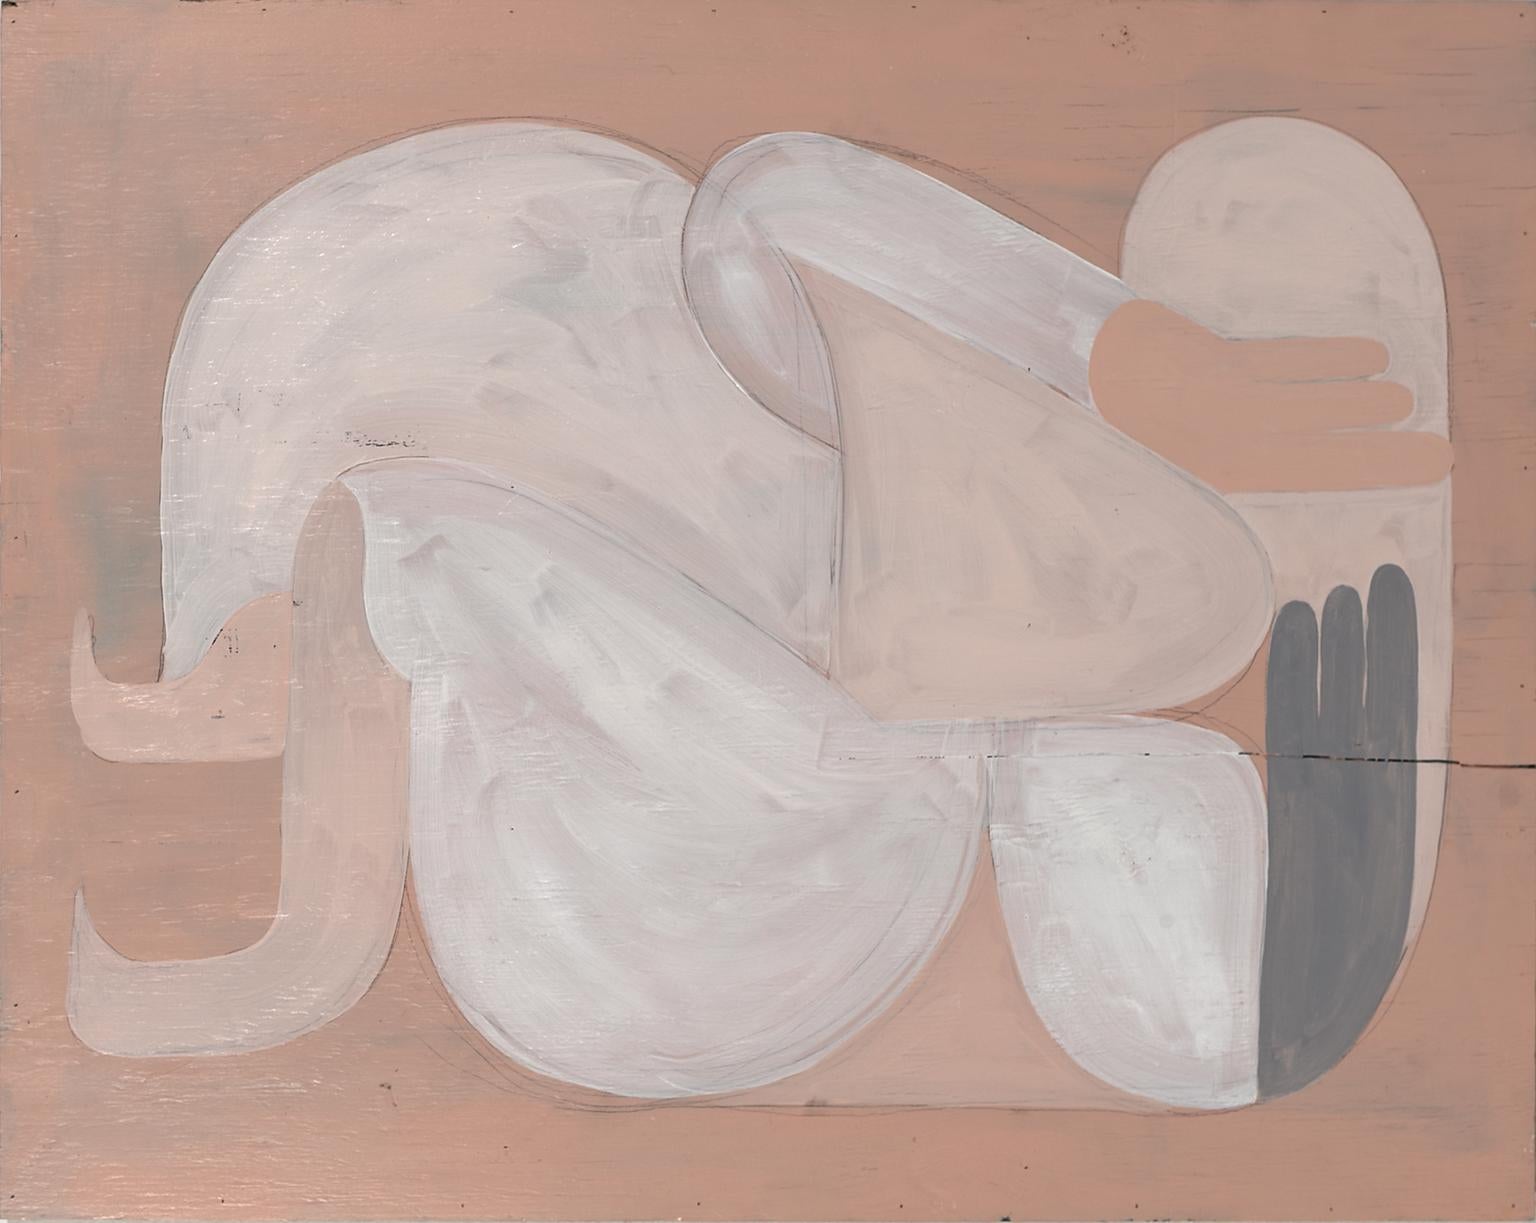 The subtle expression of self-absorbtion, Abstract. Pink, coral, white and grey - Painting by Kyle Andrew Steed